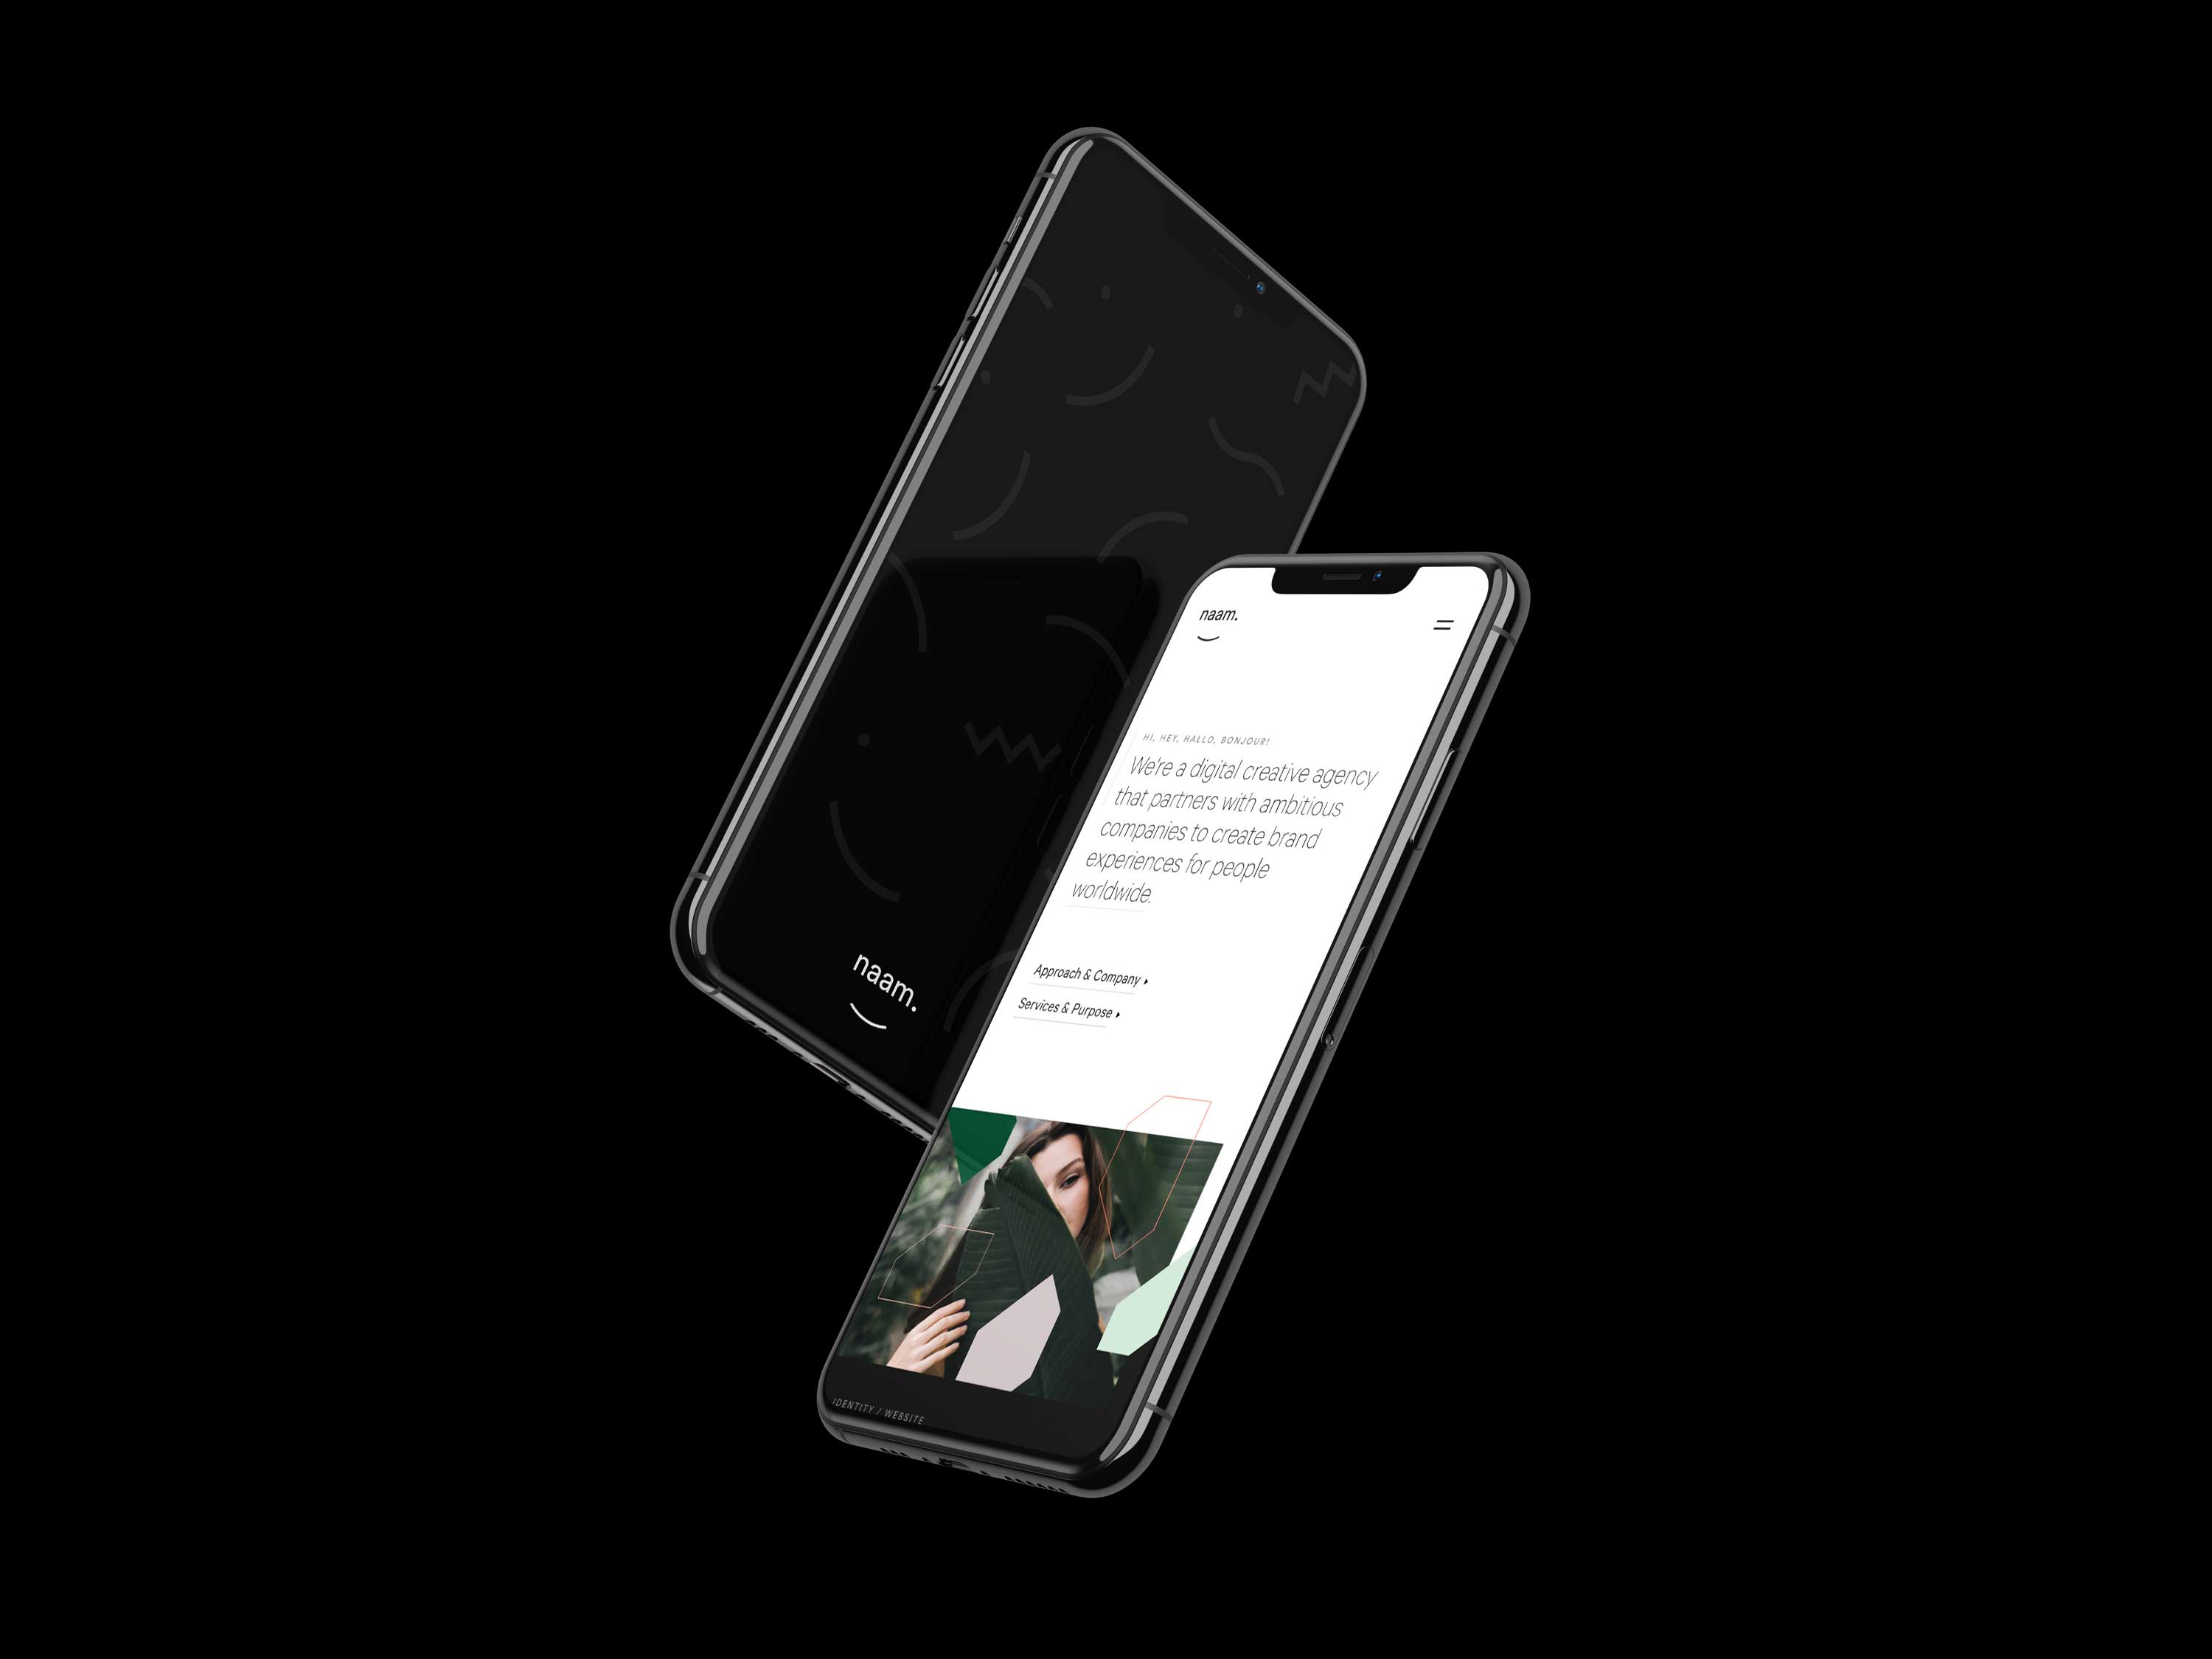 Two floating iPhone XS with the new Naam brand and website.